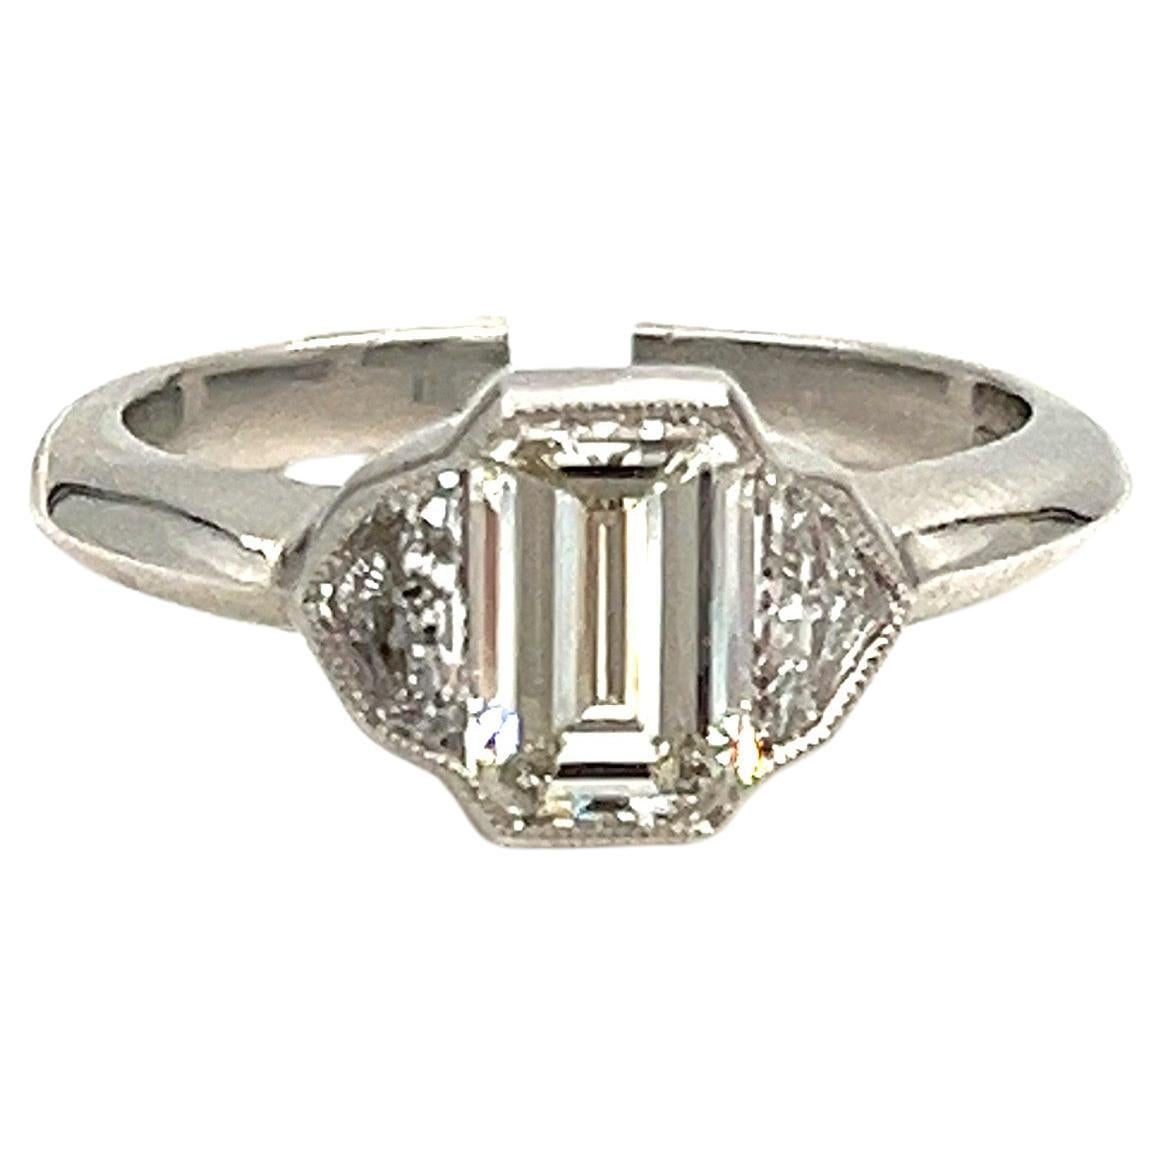 1.23 ct GIA Certified Emerald Cut Diamond Ring  For Sale